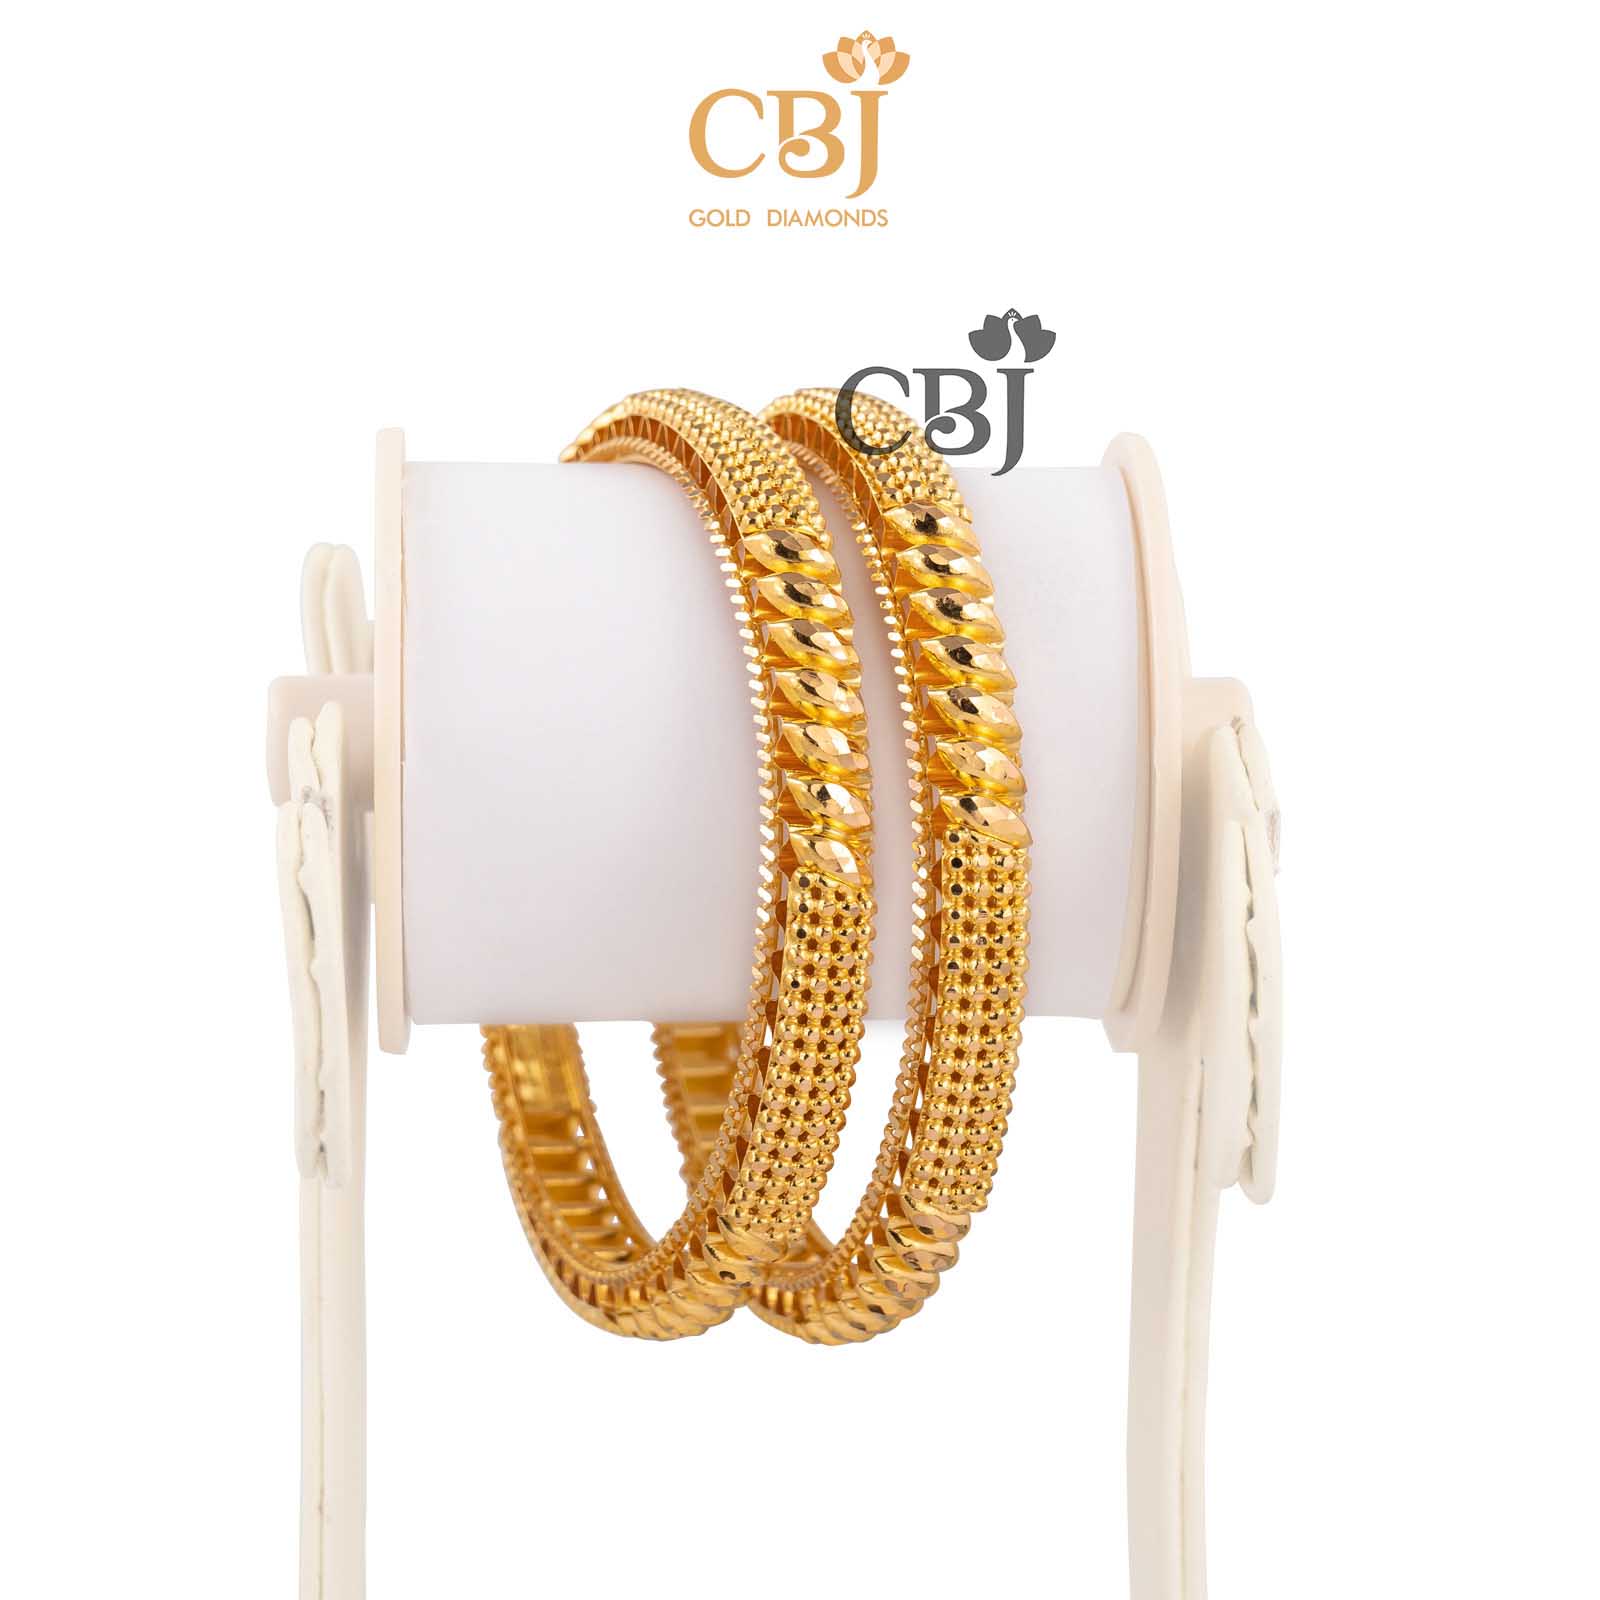 A heavy bangle featuring a plain traditional design in 22k gold.